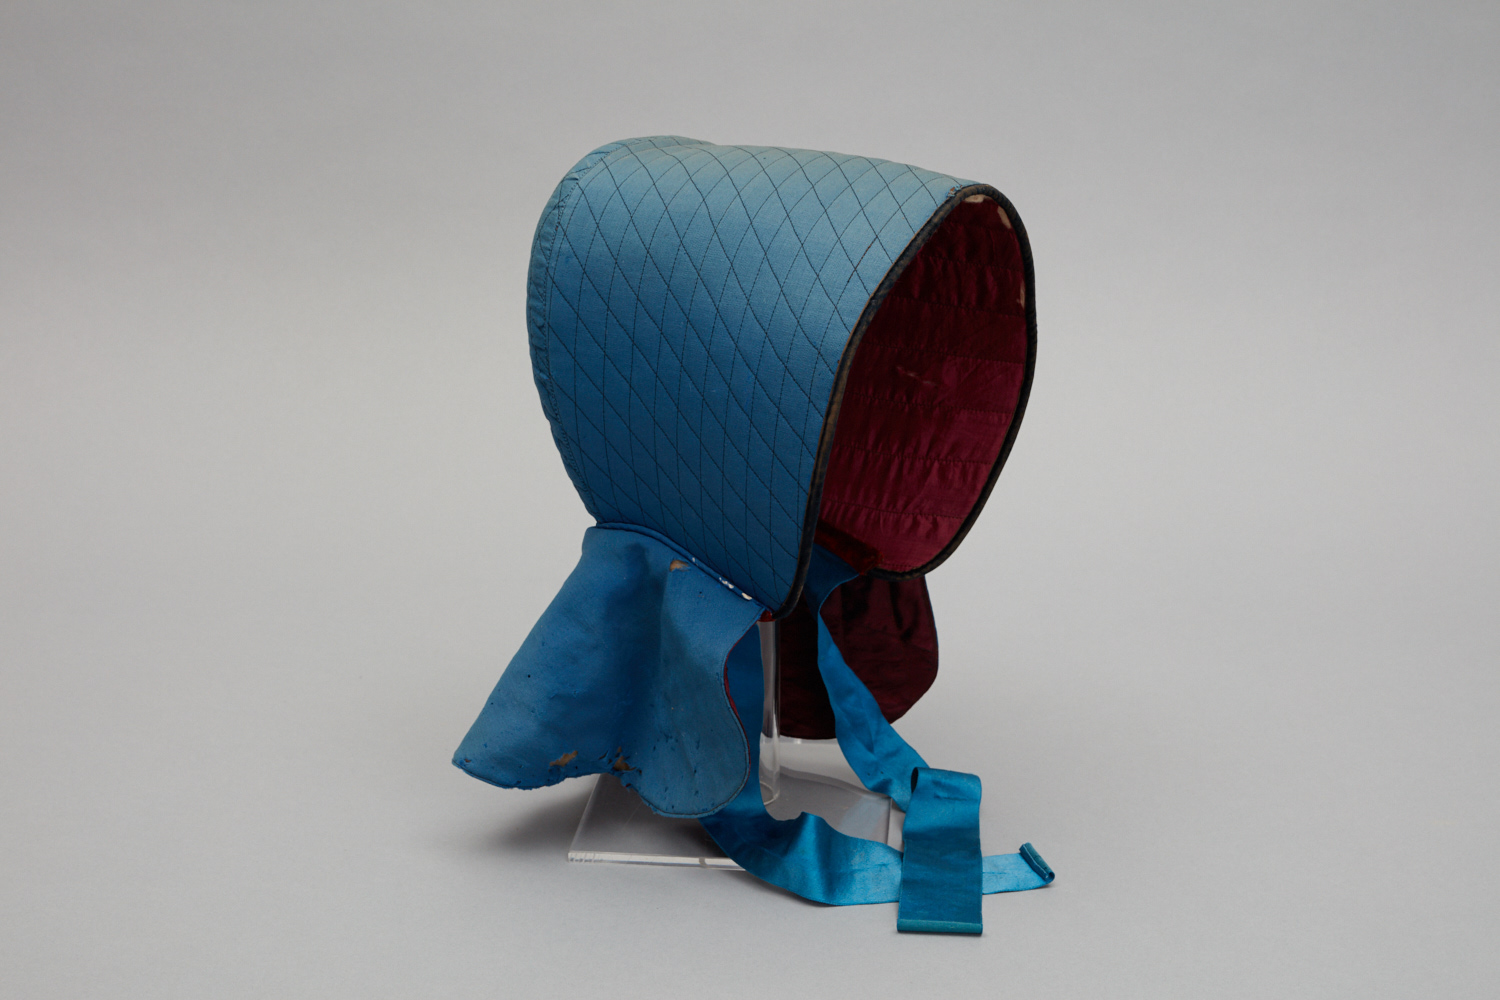 A blue and red hat on a stand.